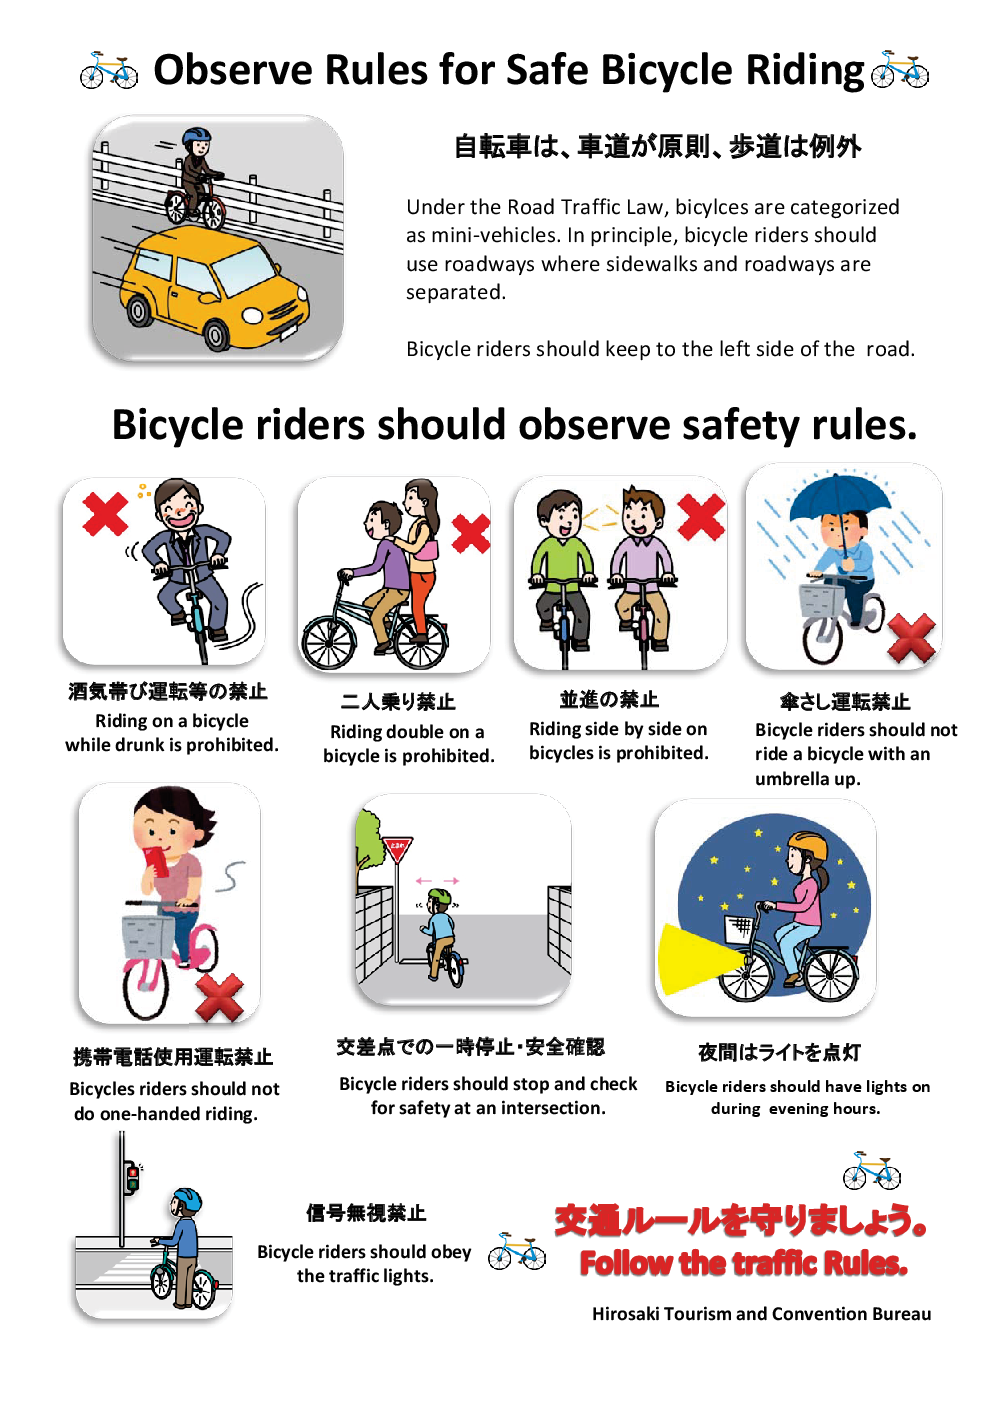 Observe Rules for Safe Bicycle Riding